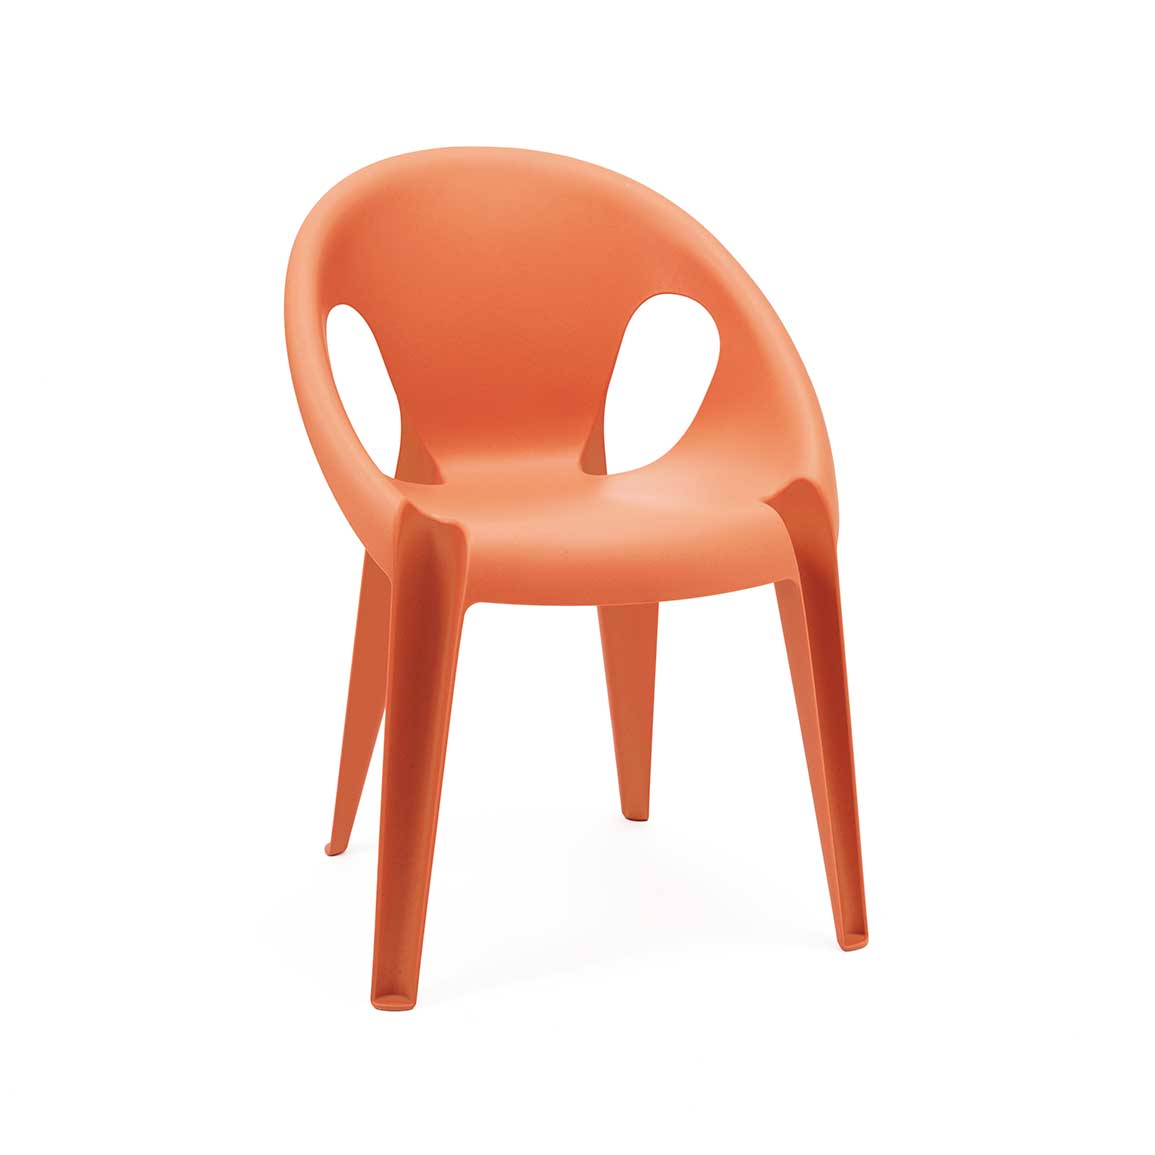 Bell Chair by Konstantin Grcic